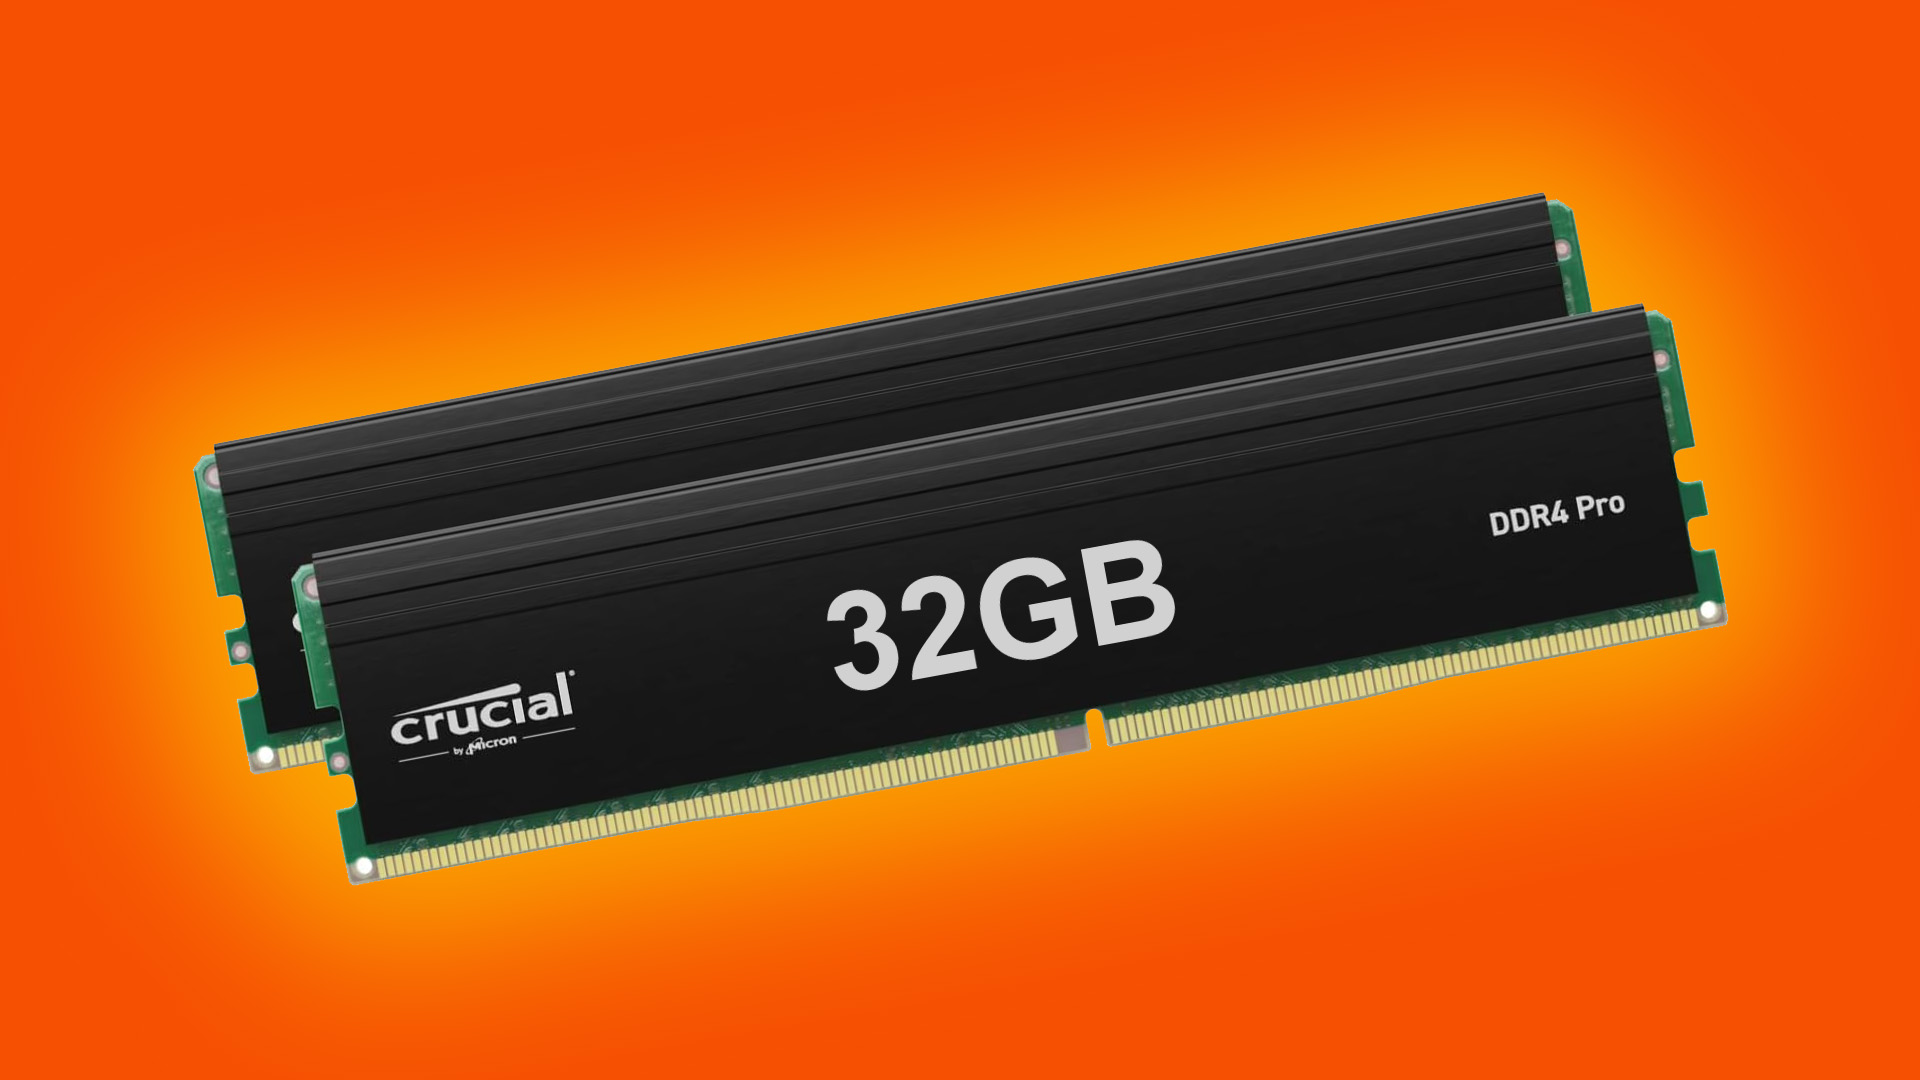 Upgrade to 32GB of Crucial RAM for just $57 with this Amazon deal